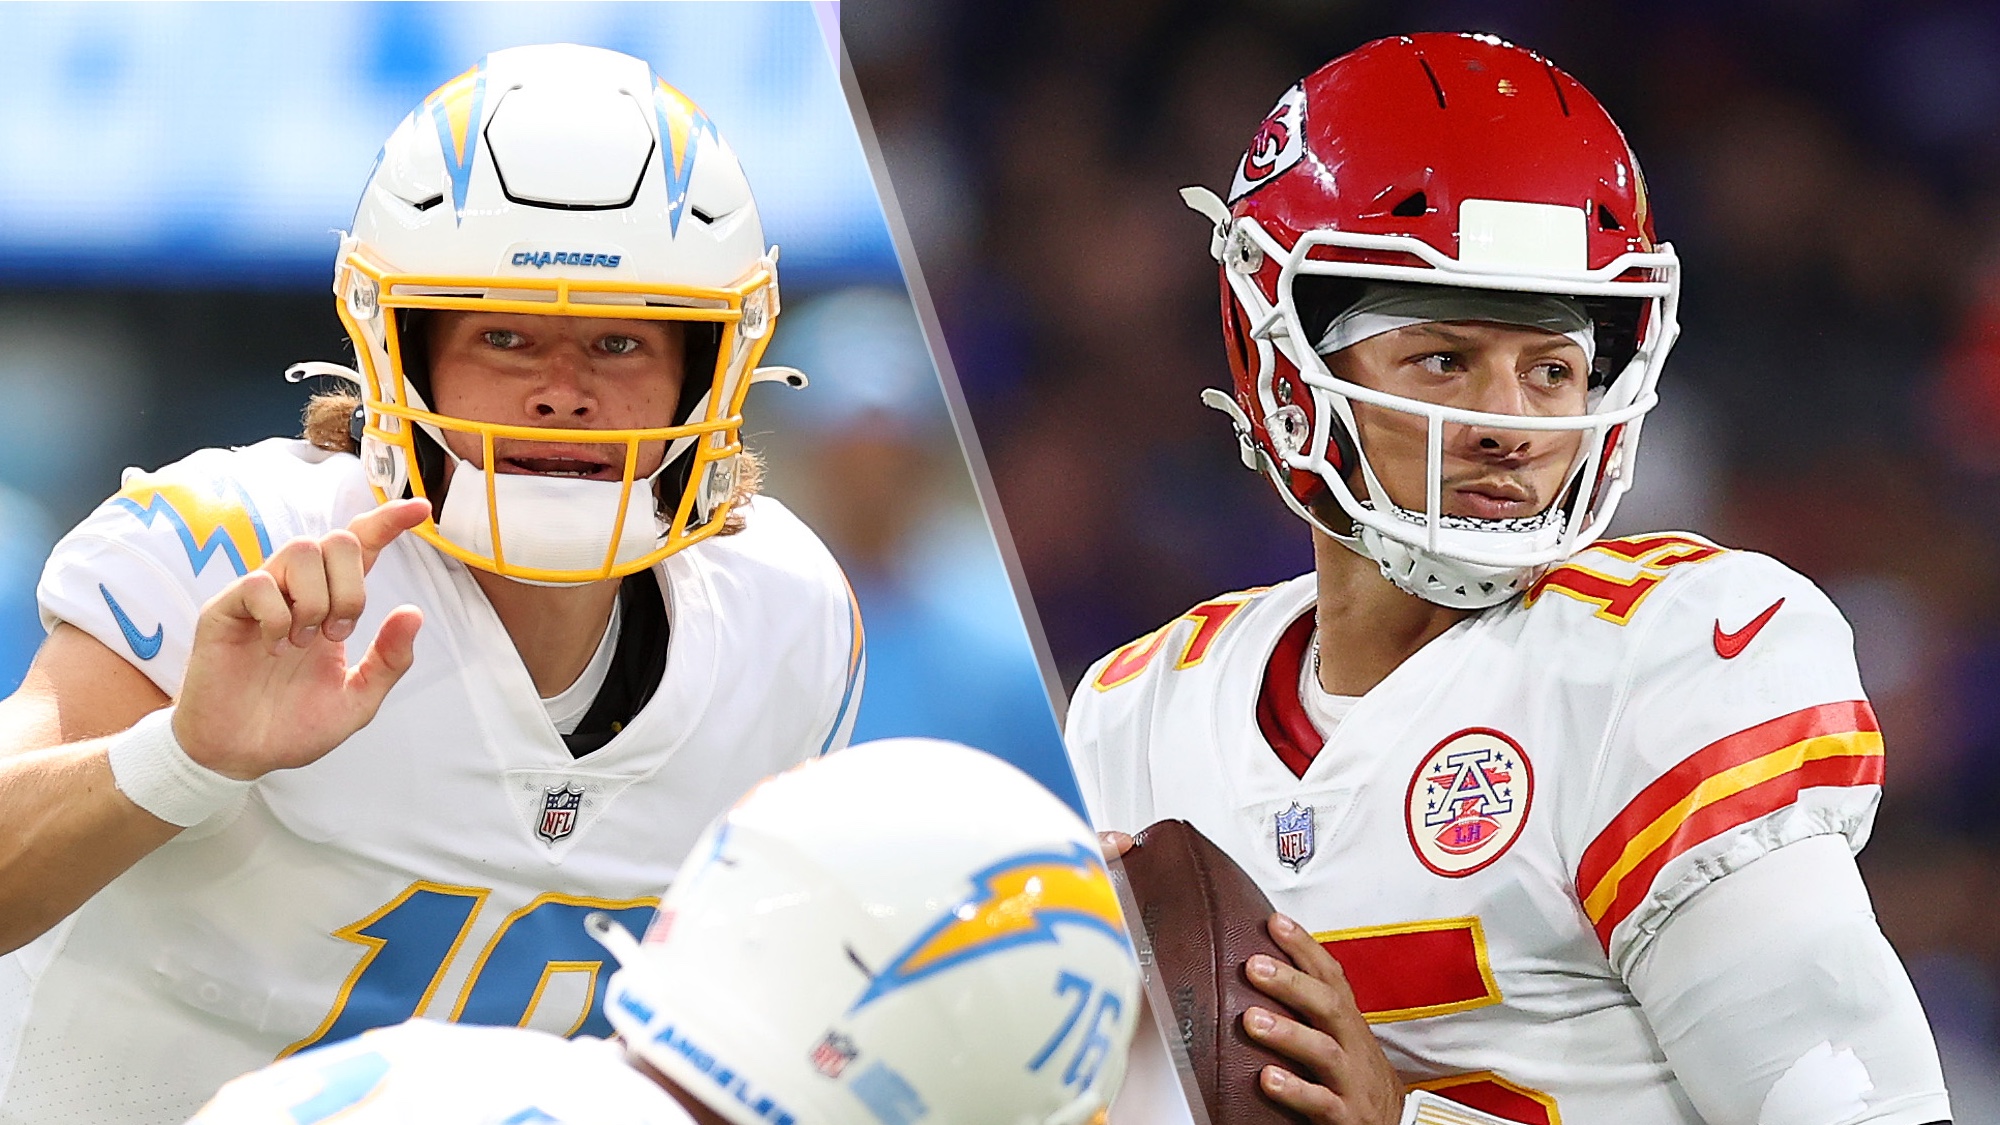 Chargers vs Chiefs live stream: How to watch NFL week 3 game online | Tom's Guide